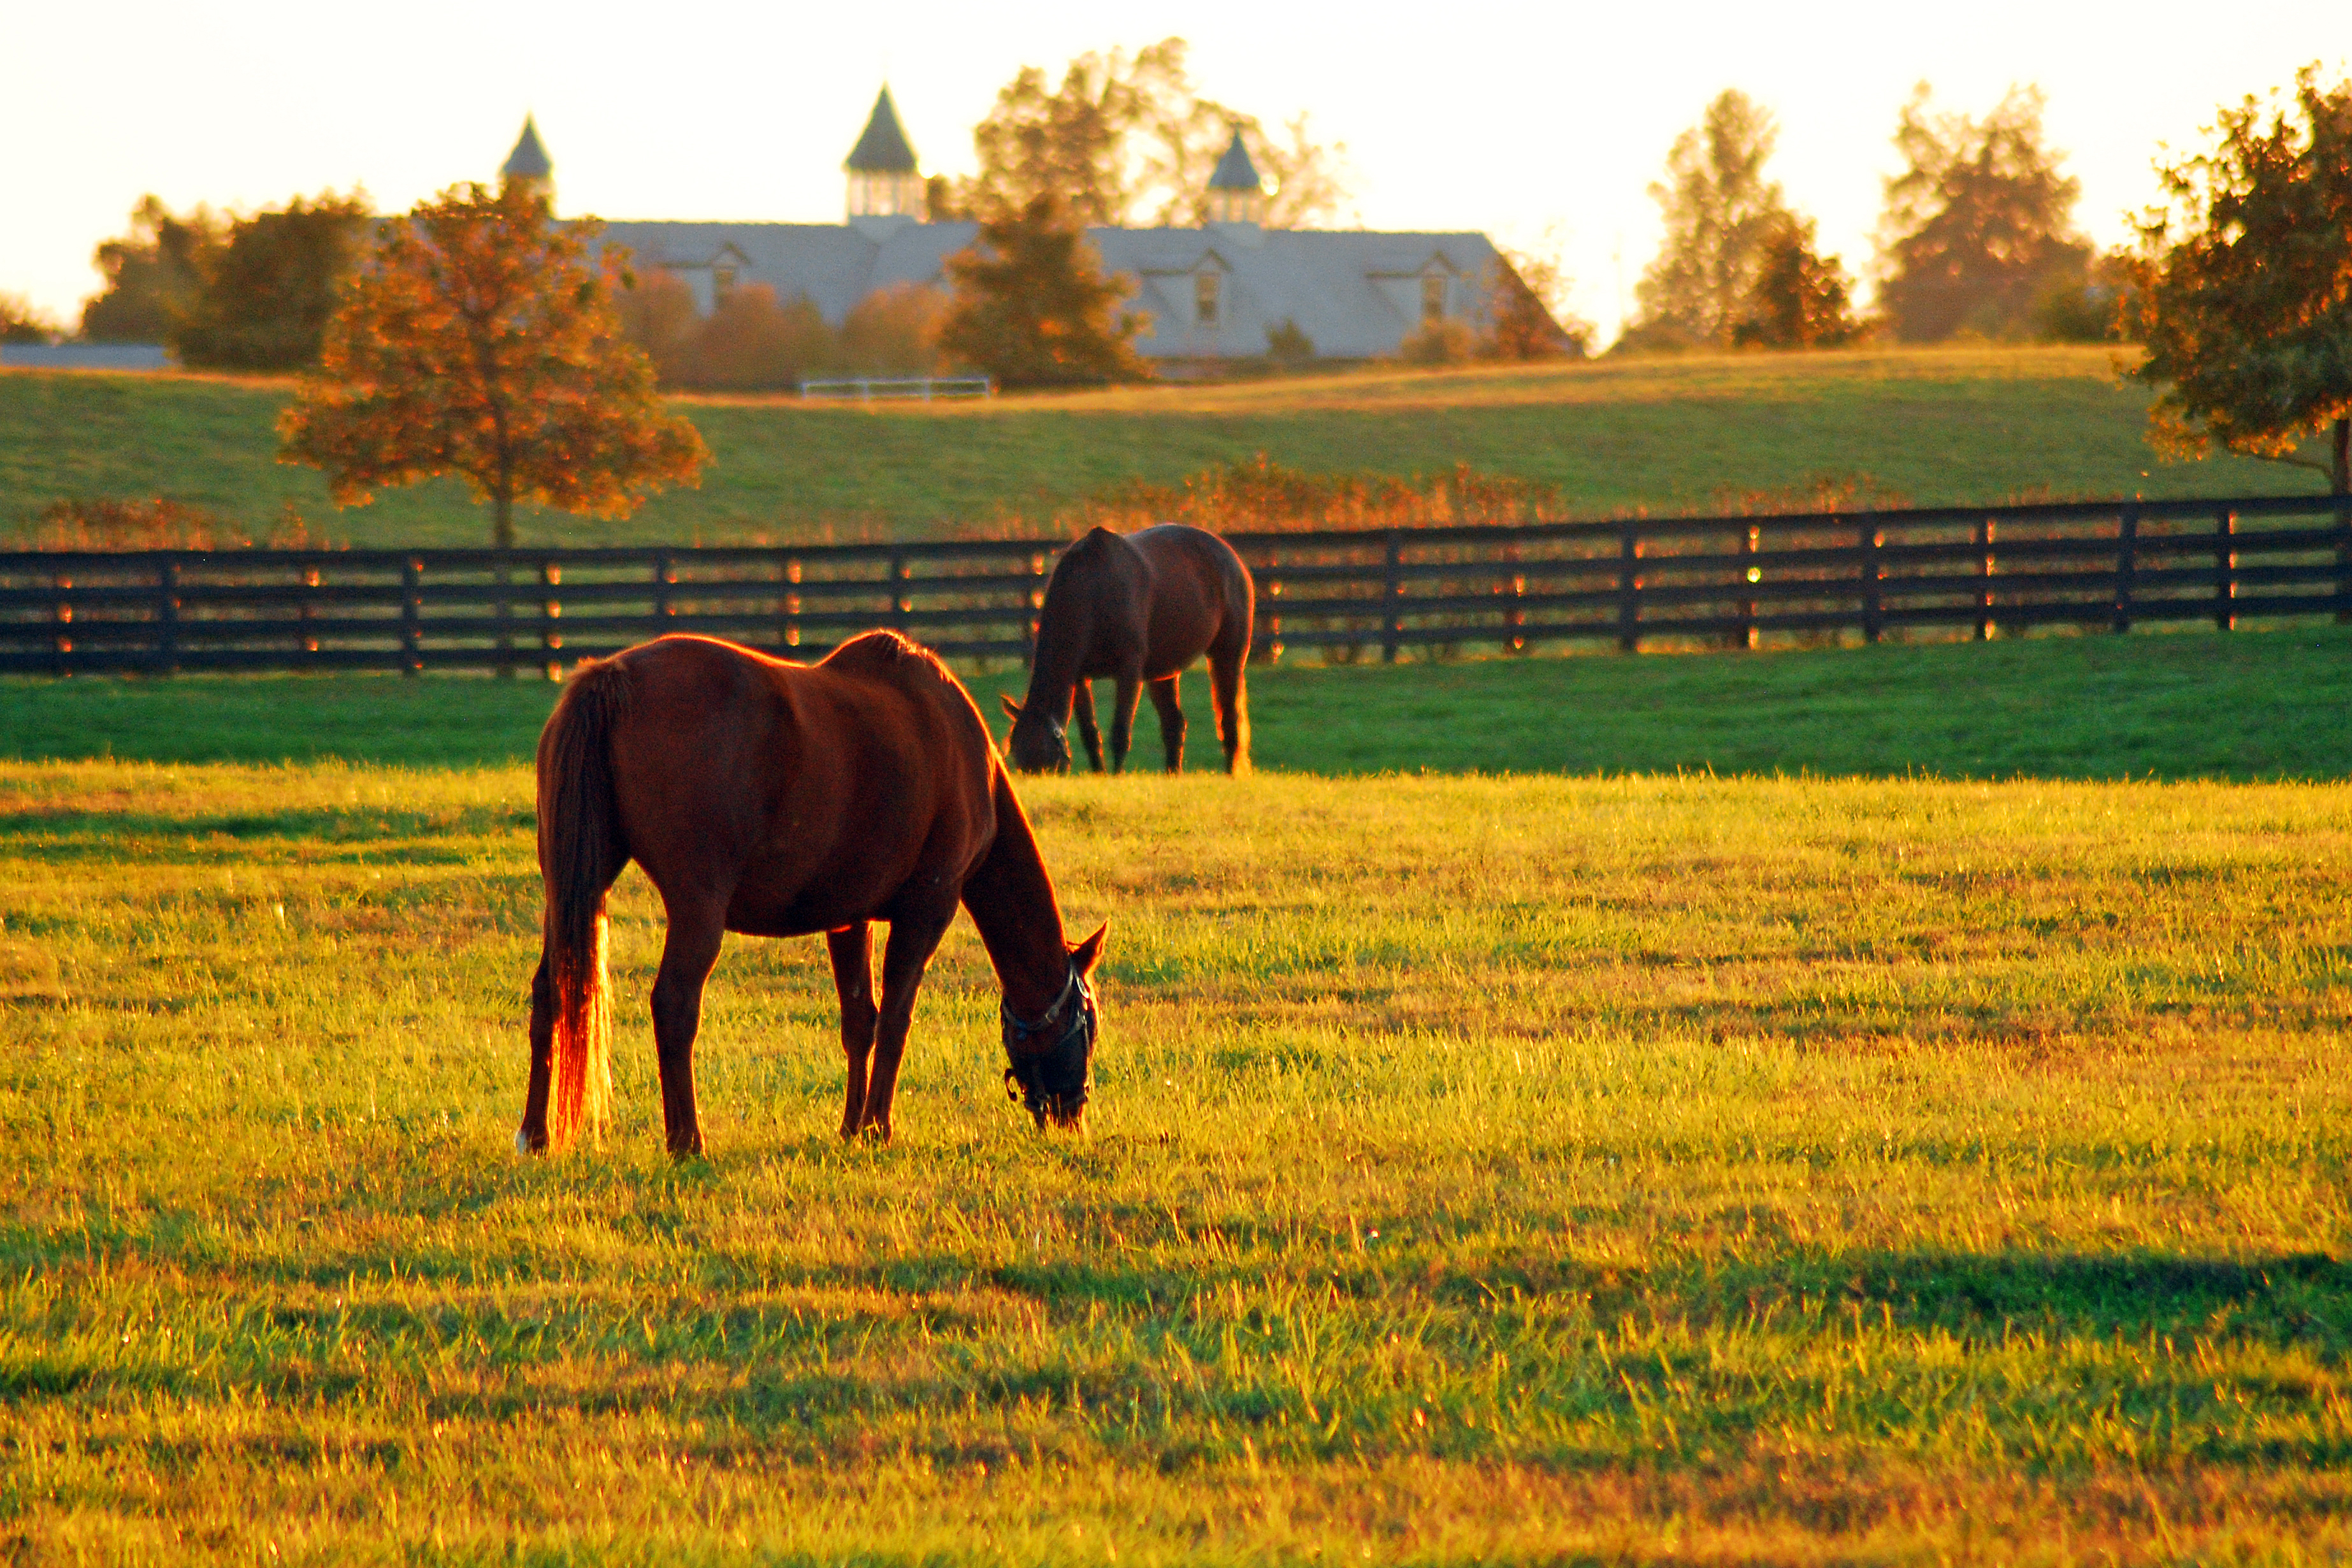 Two horses grazing late afternoon in Kentucky.